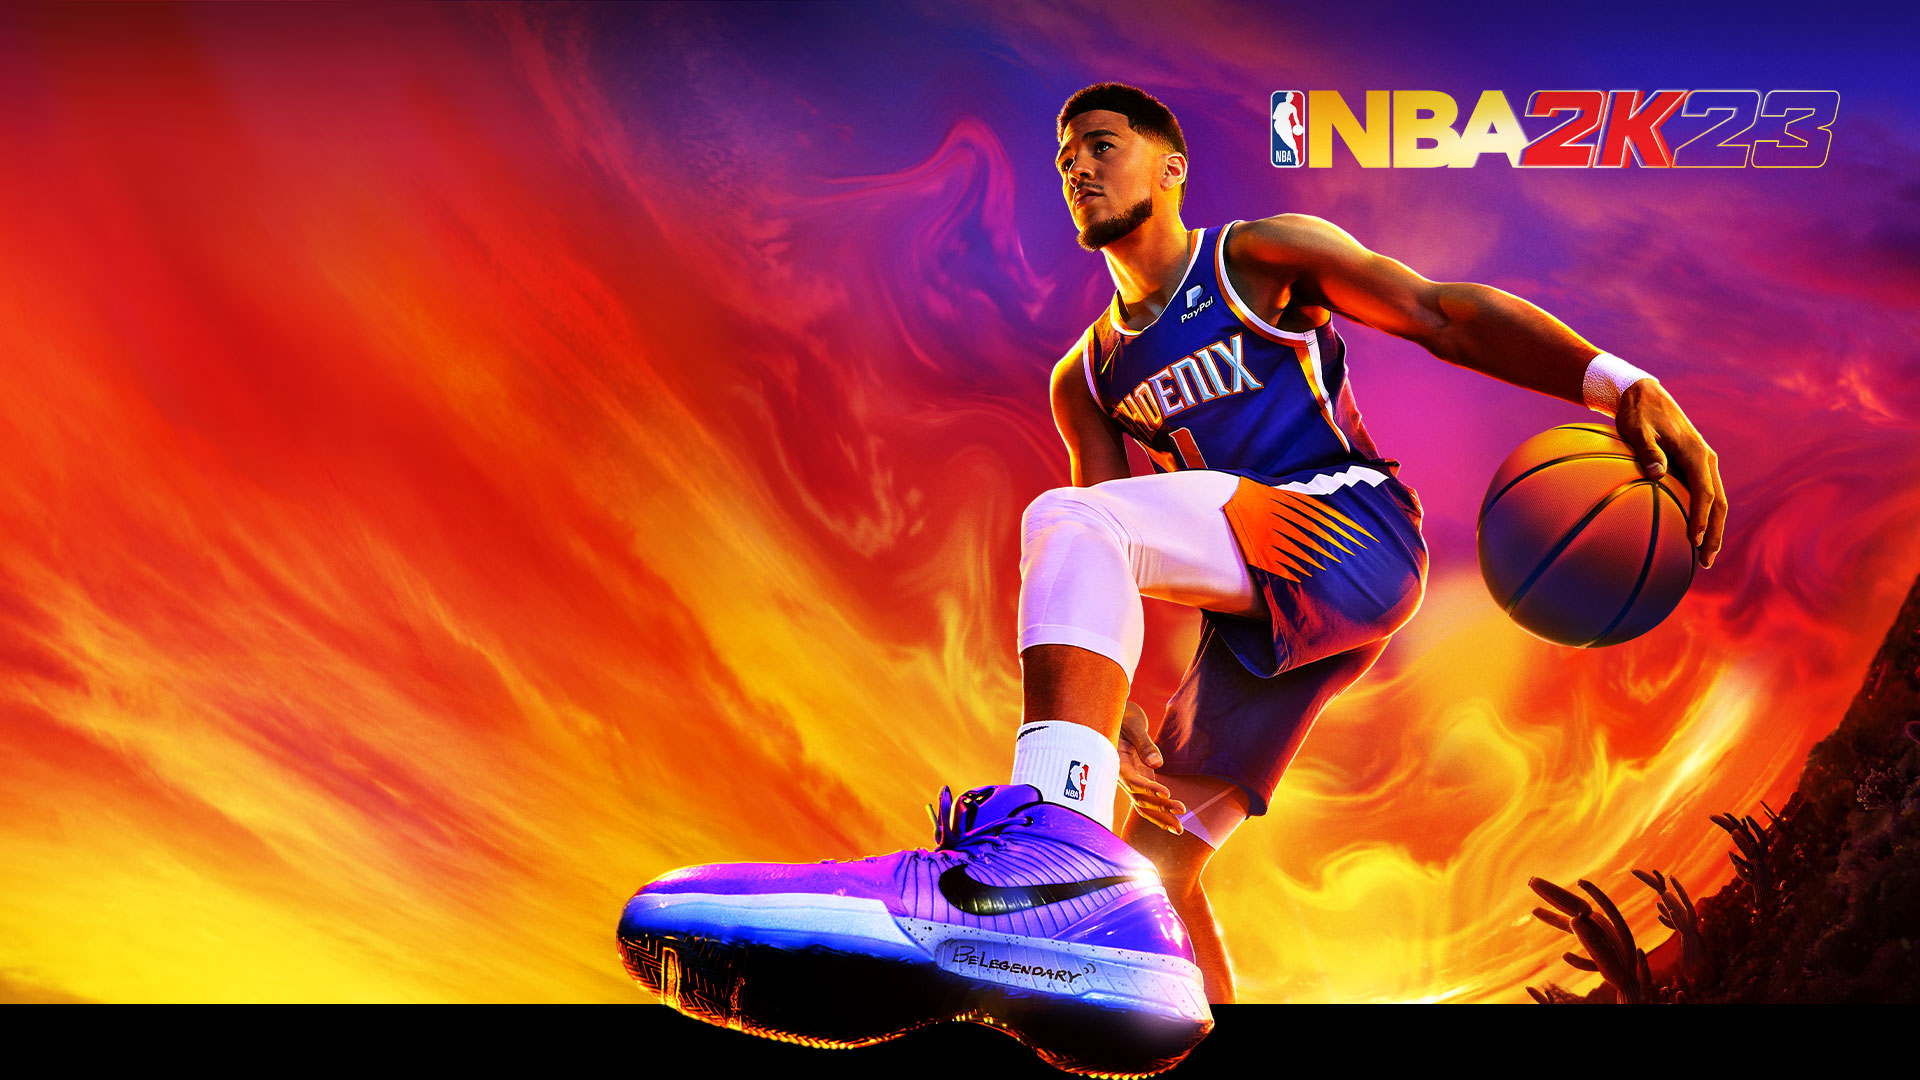 NBA 2K23, Devin Booker, number 1 for the Phoenix Suns, dribbles a basketball under a colorful desert sky.